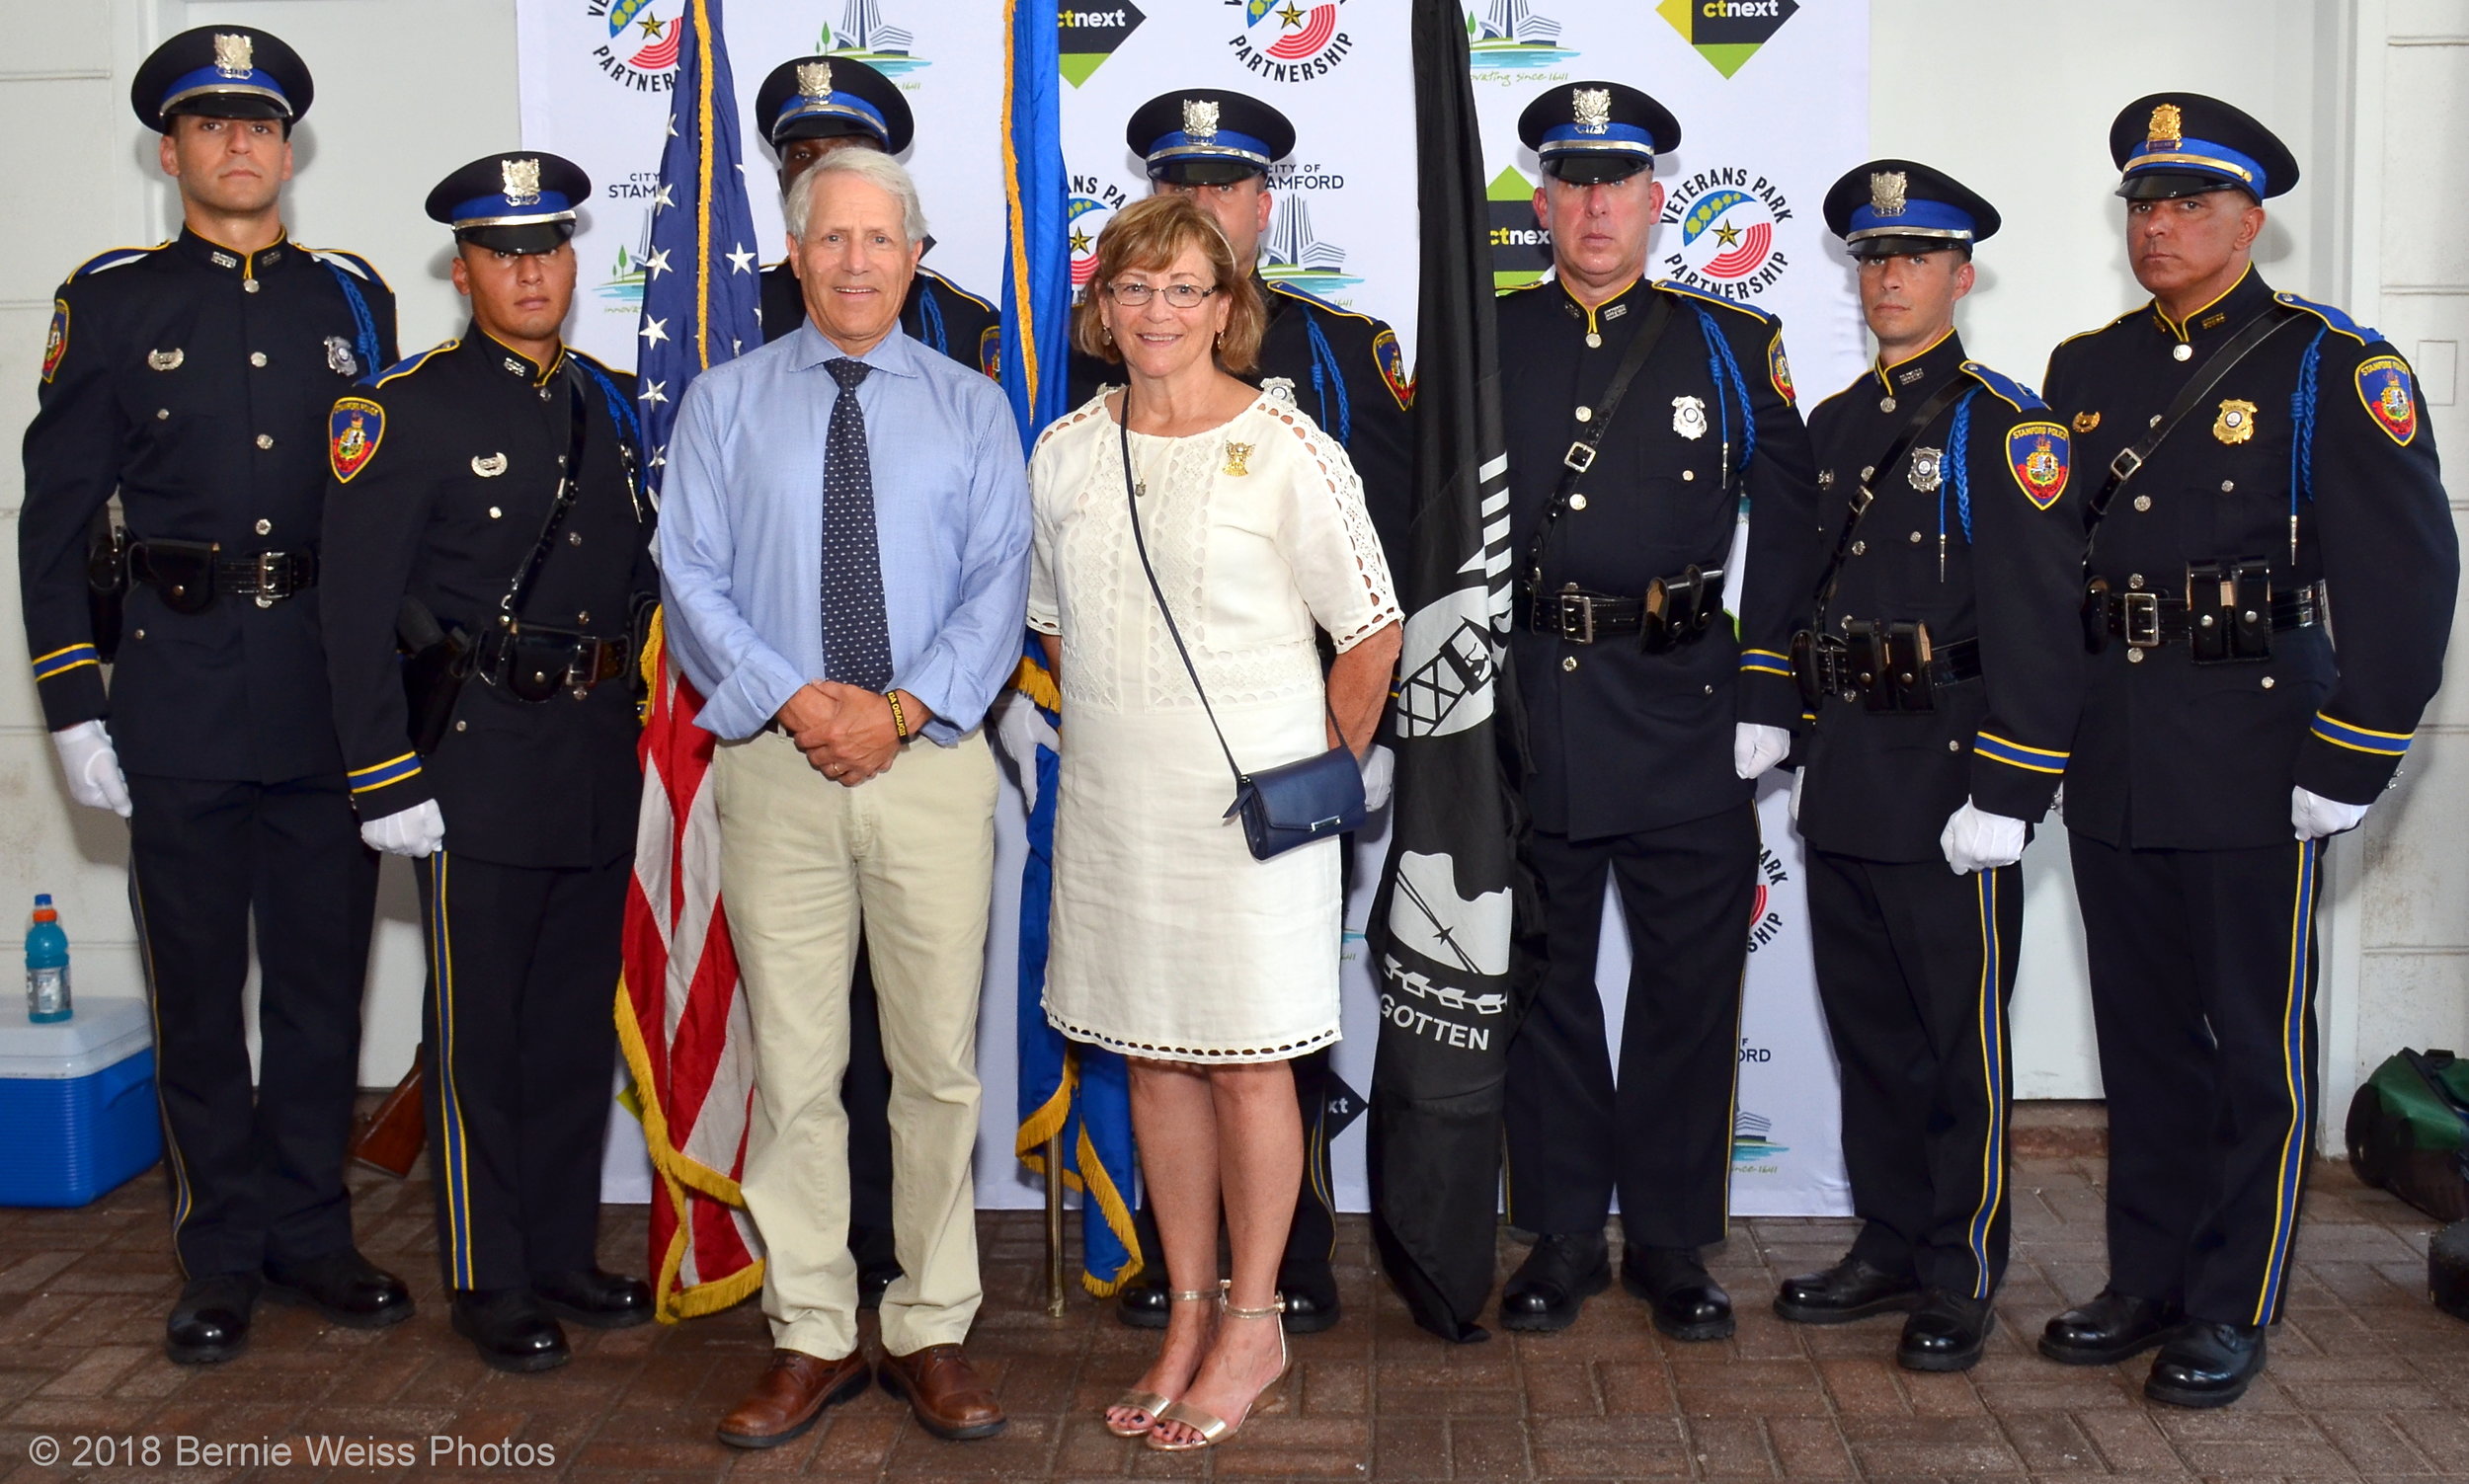 A picture of Stamford's mayor in front of a line of policemen at a groundbreaking ceremony